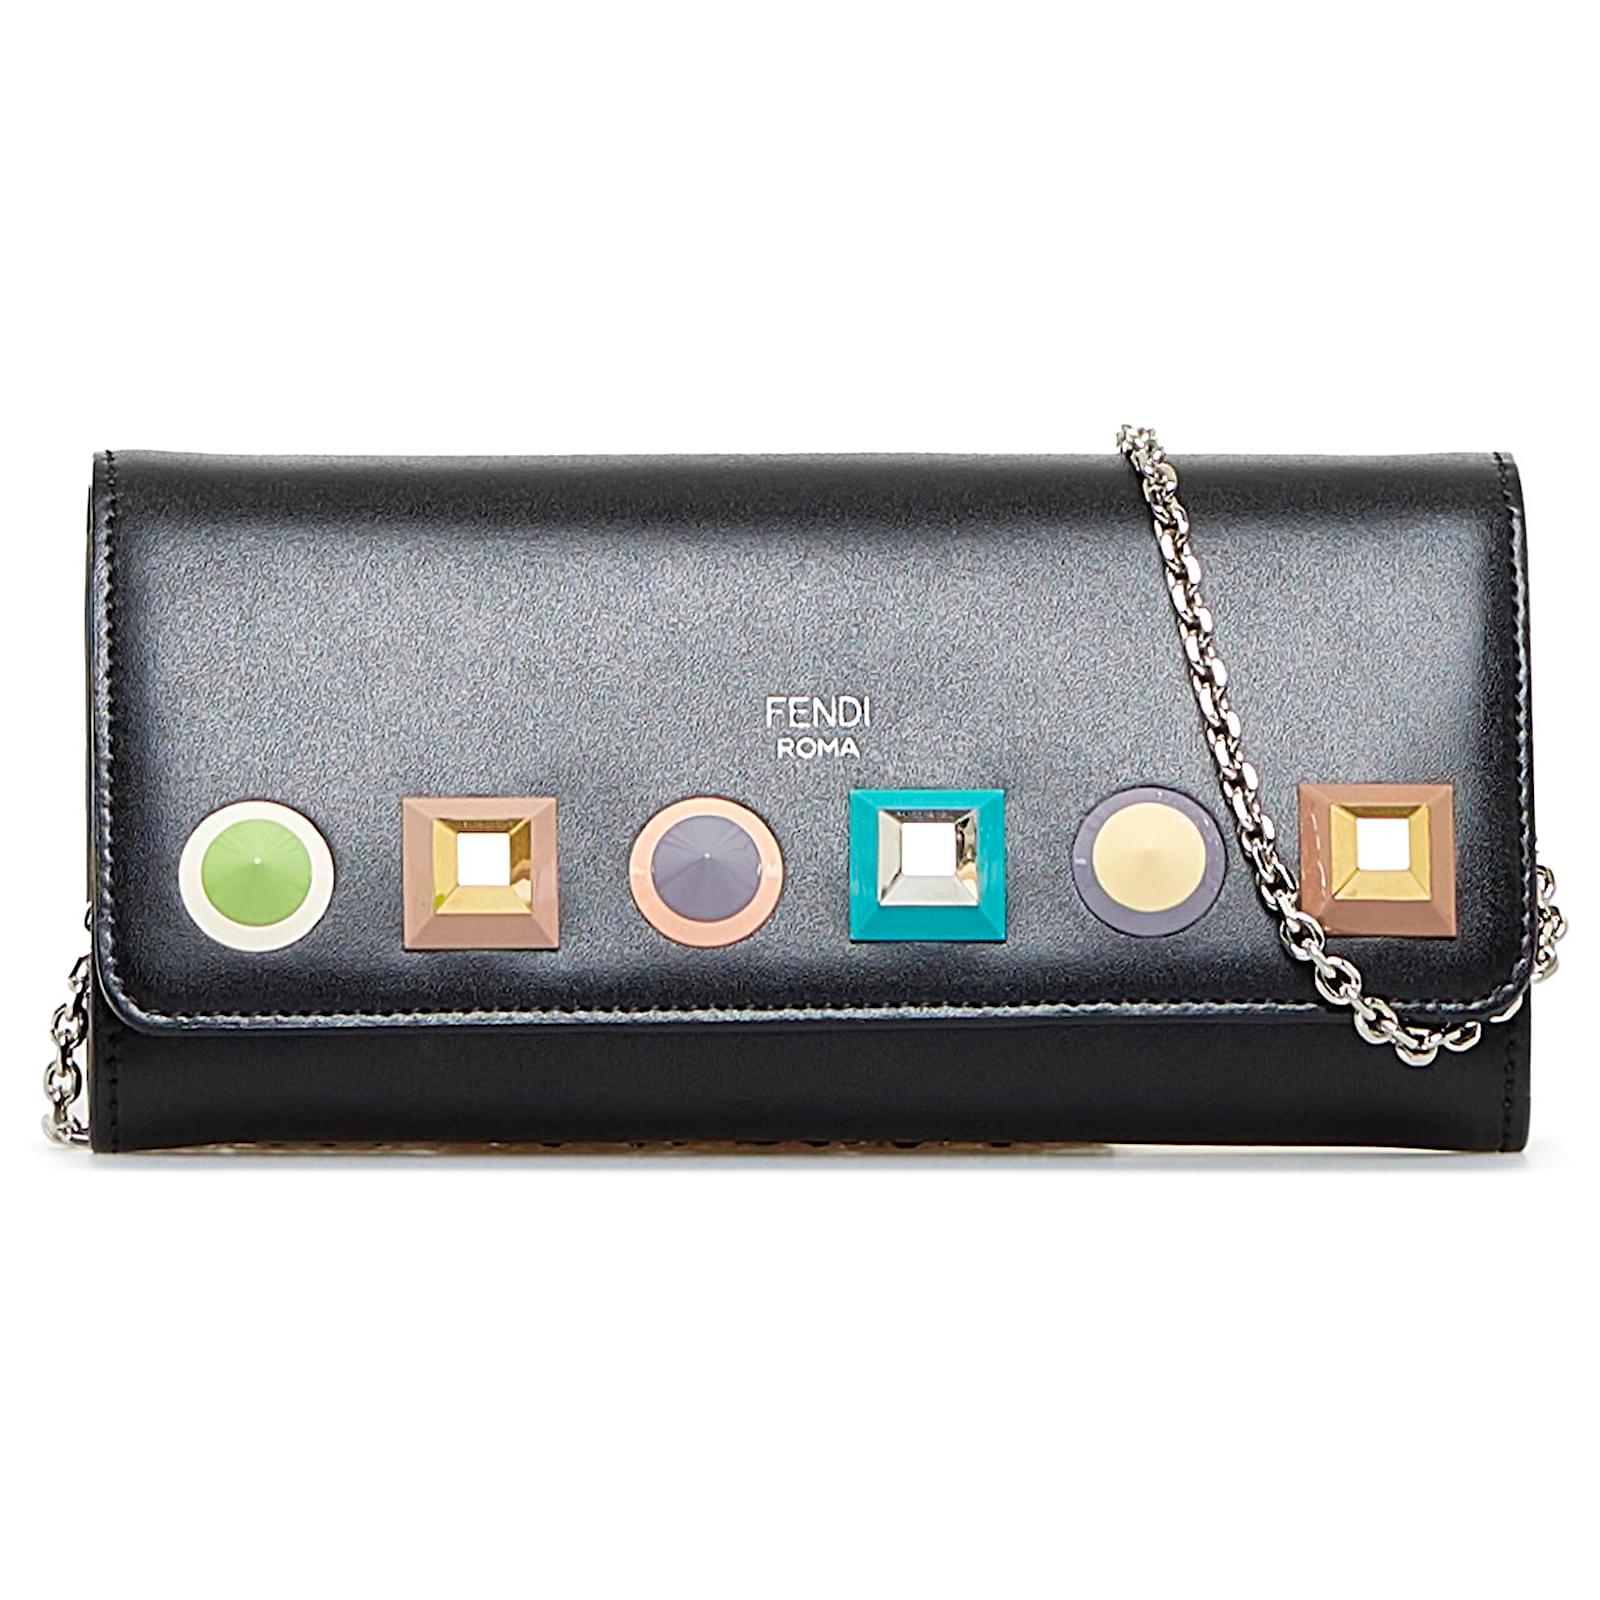 Fendi - Black Leather Studded Chain Continental Wallet